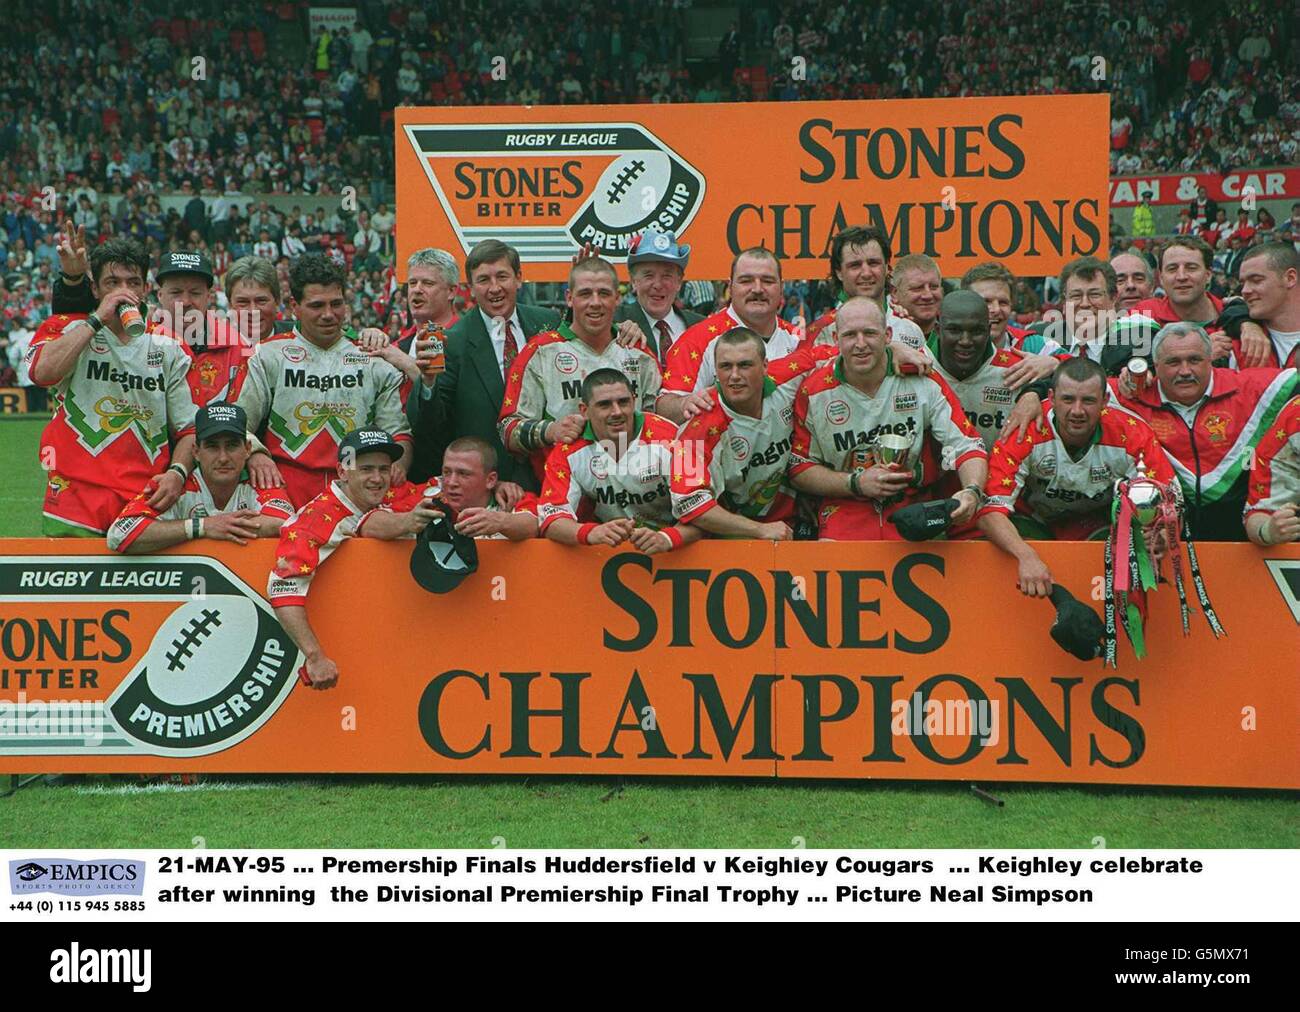 21-MAY-95, Premership Finals Huddersfield v Keighley Cougars, Keighley celebrate after winning the Divisional Premiership Final Trophy, Picture Neal Simpson Stock Photo